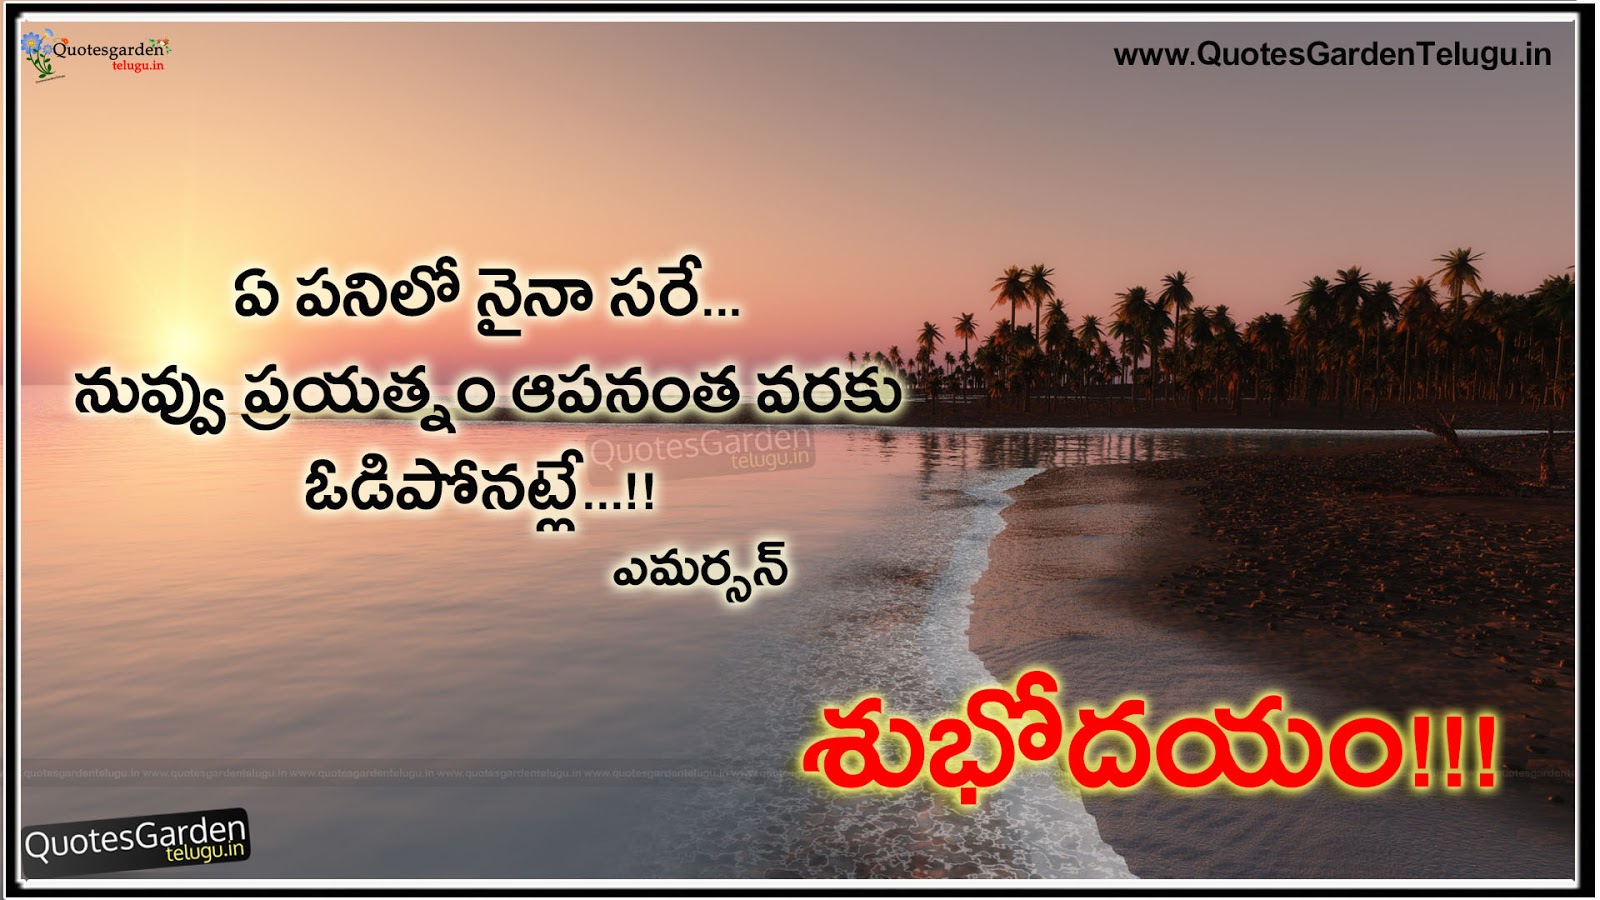 New Good Morning Telugu Quotations with Cool Images online ...